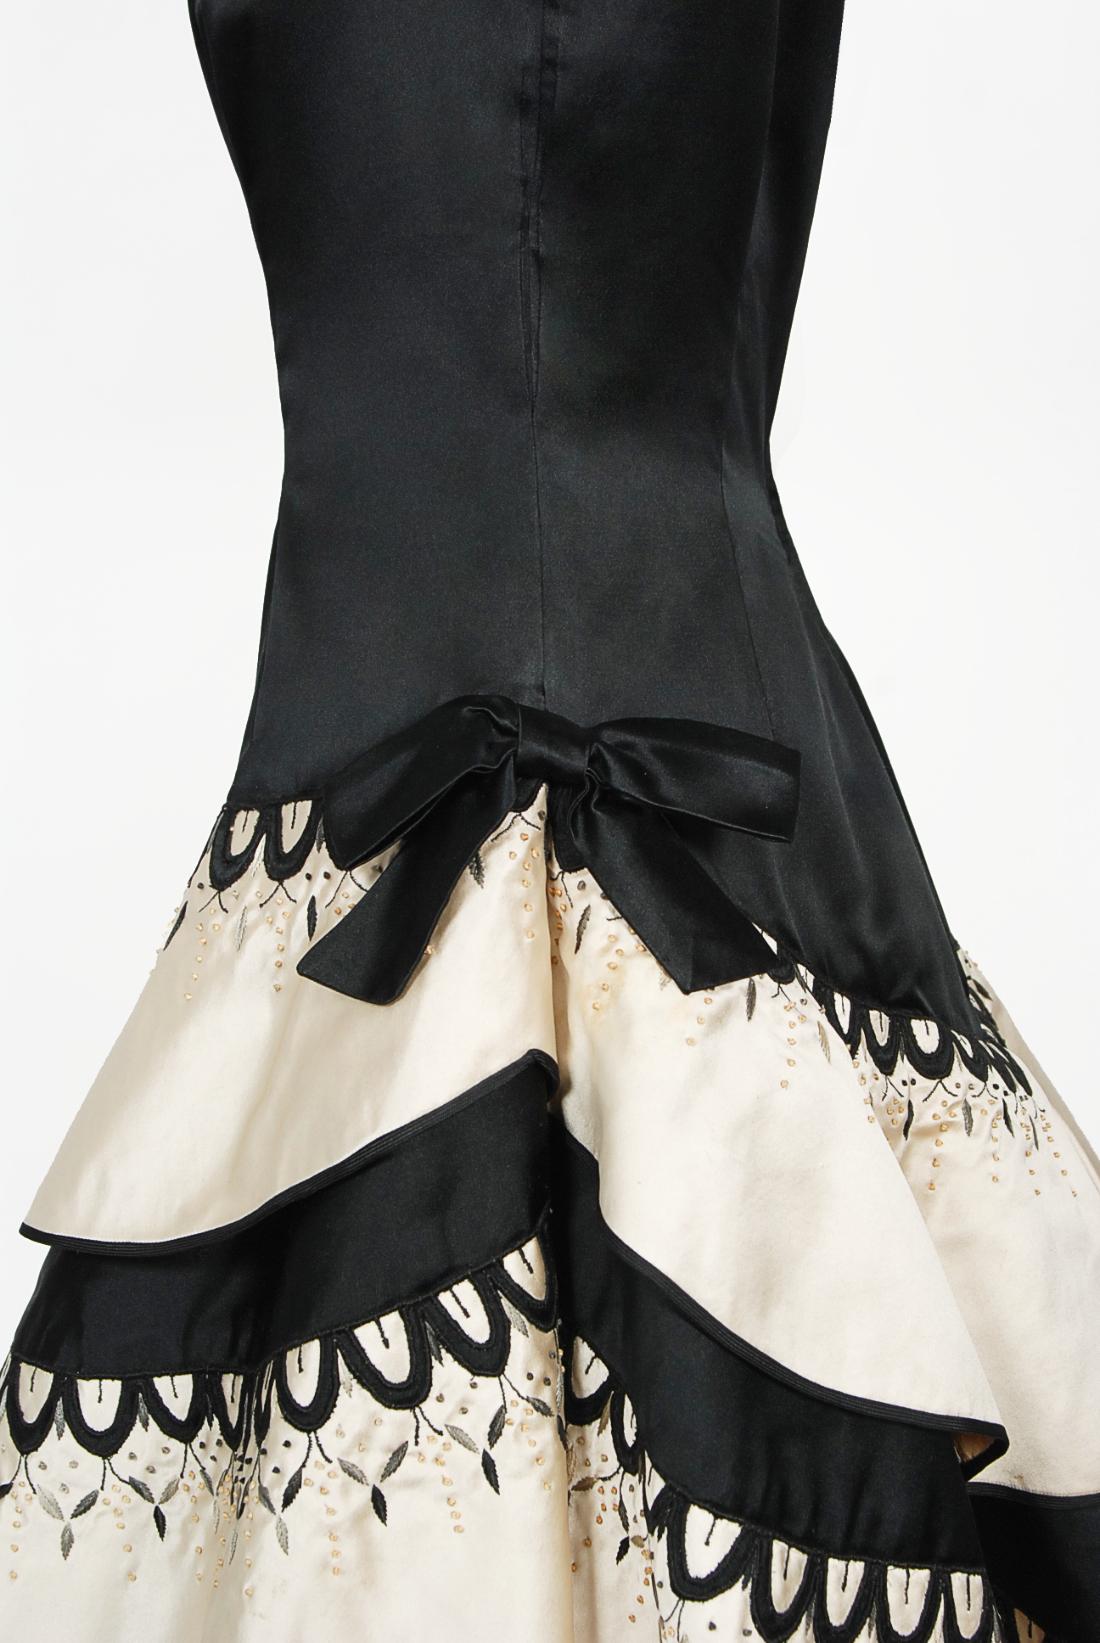 Vintage 1950's Emilio Schuberth Couture Black & Ivory Embroidered Satin Dress For Sale 9